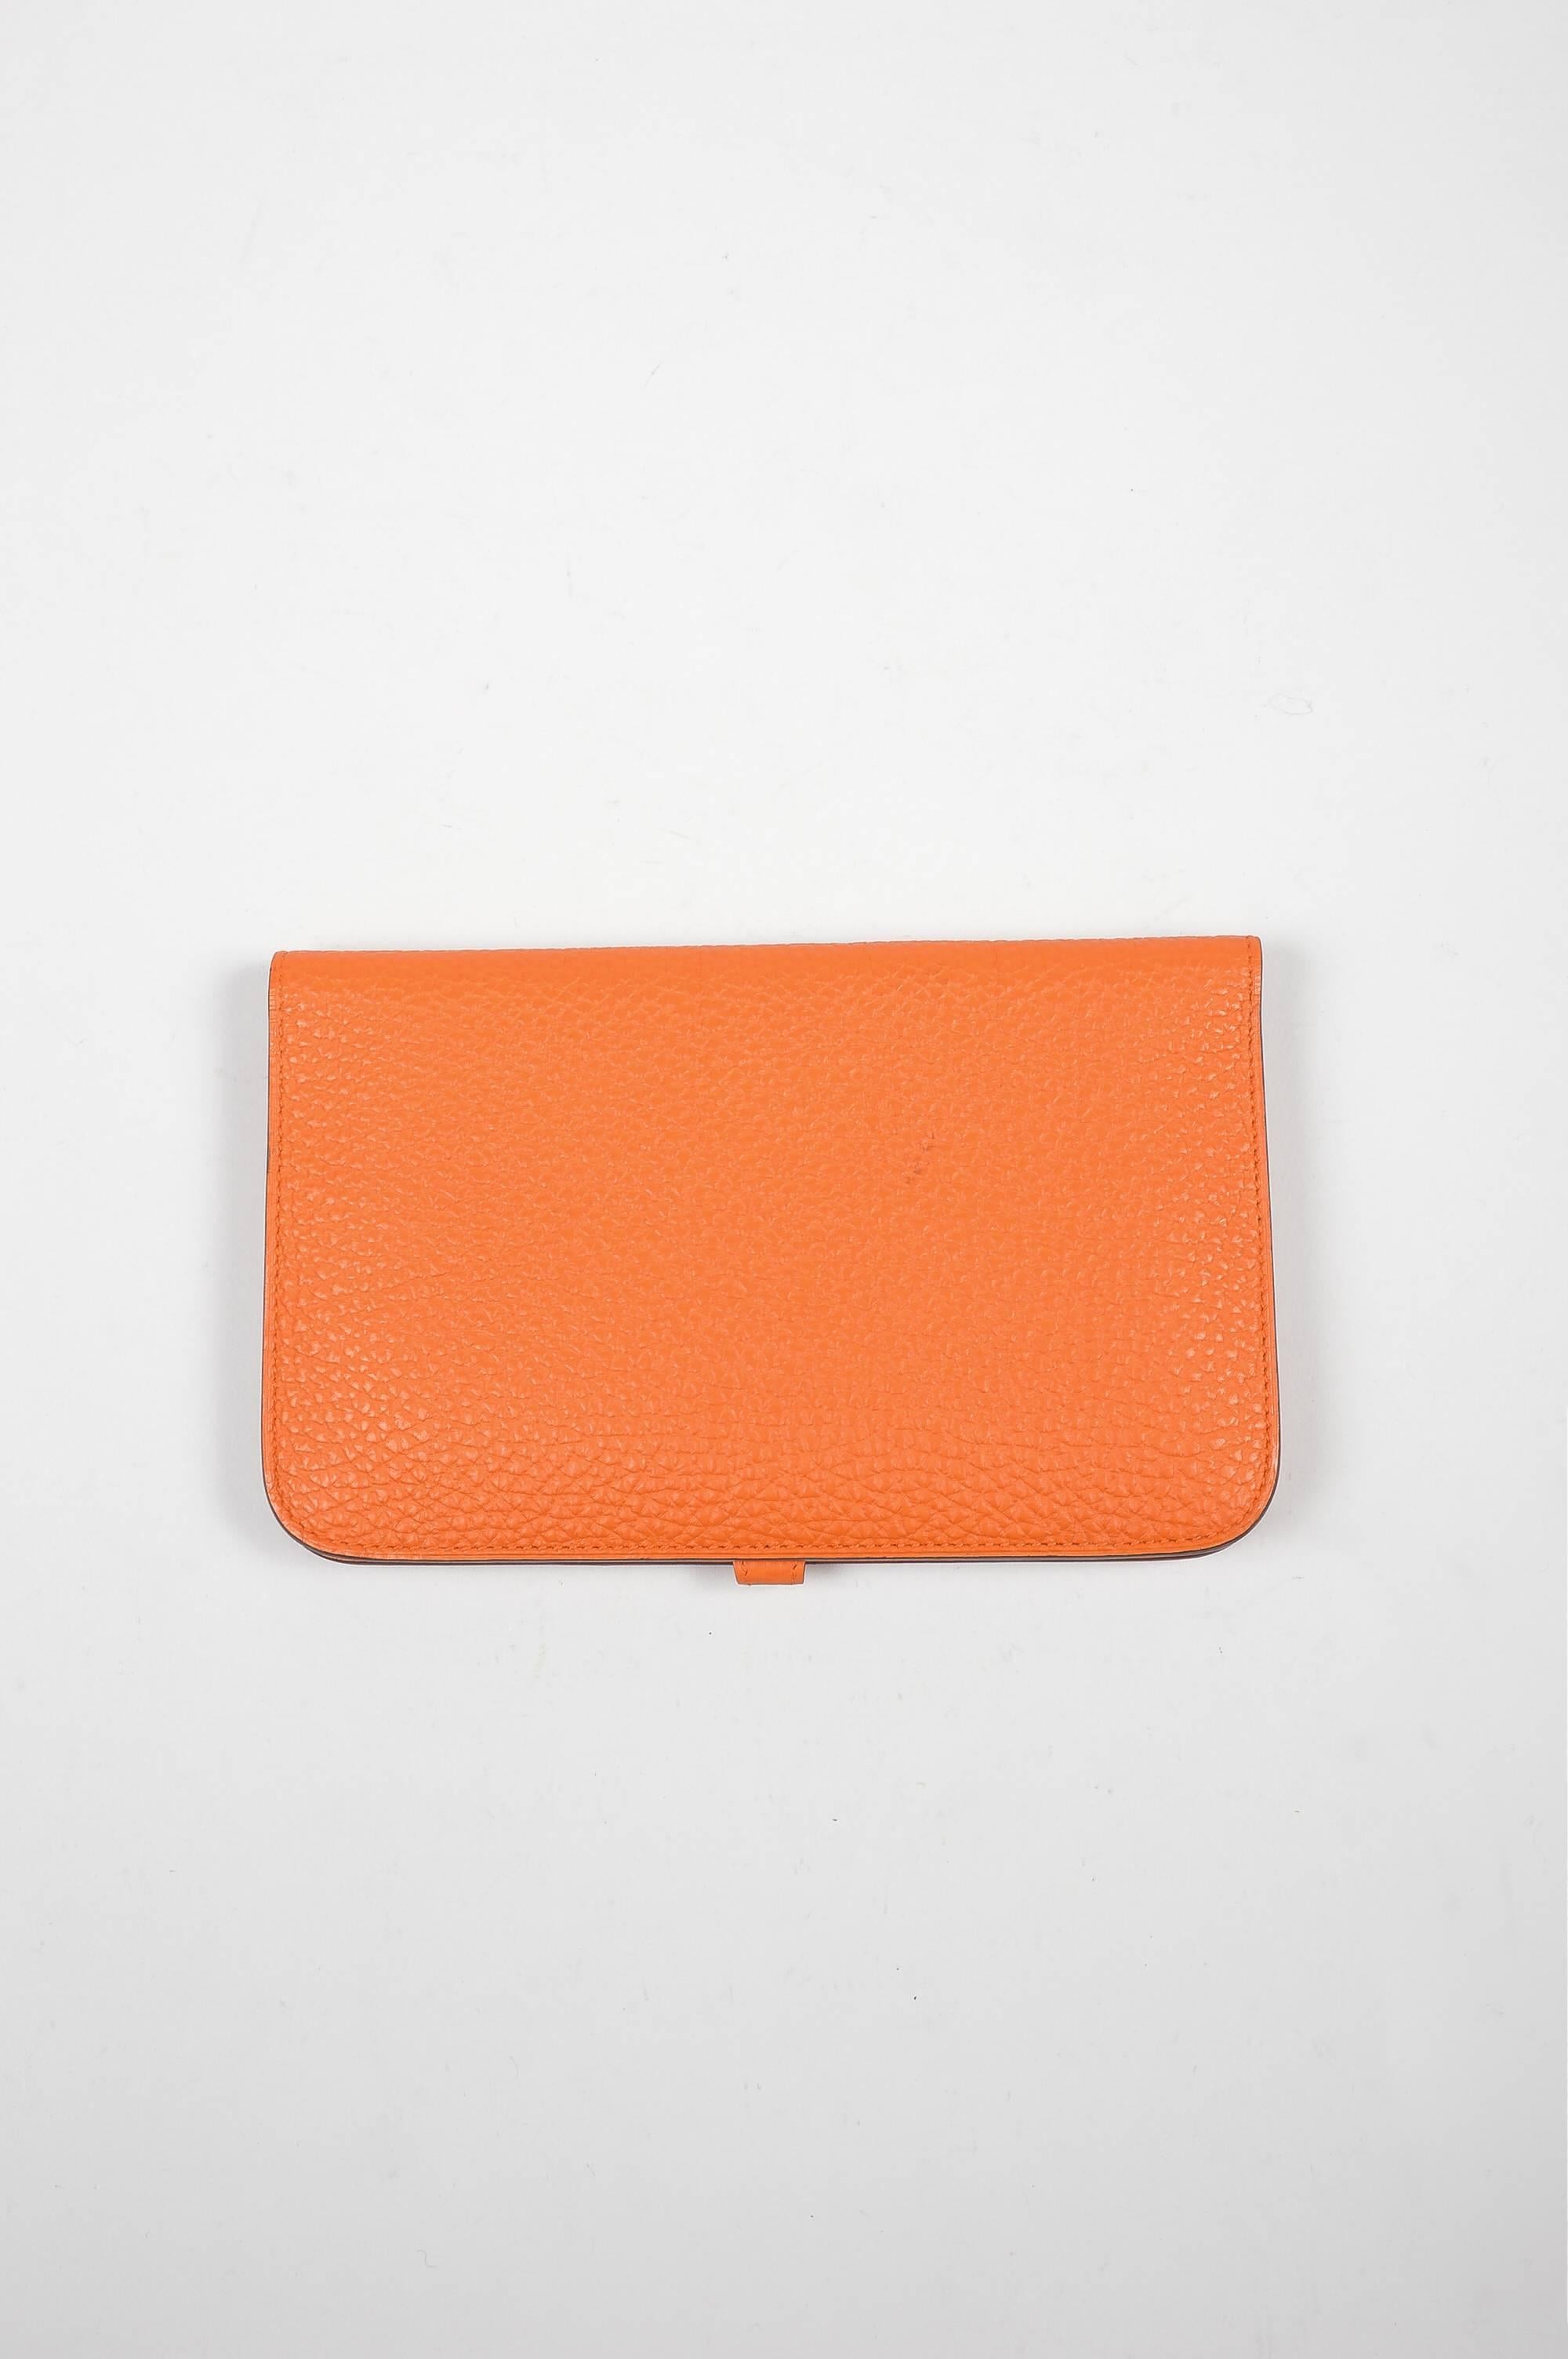 Elegant Hermes Togo leather Dogon wallet in a "capucine orange" color. A statement piece that will have heads turning when you are on your next shopping trip. Palladium "Clou de Selle" tab and leather strap closure. Grained